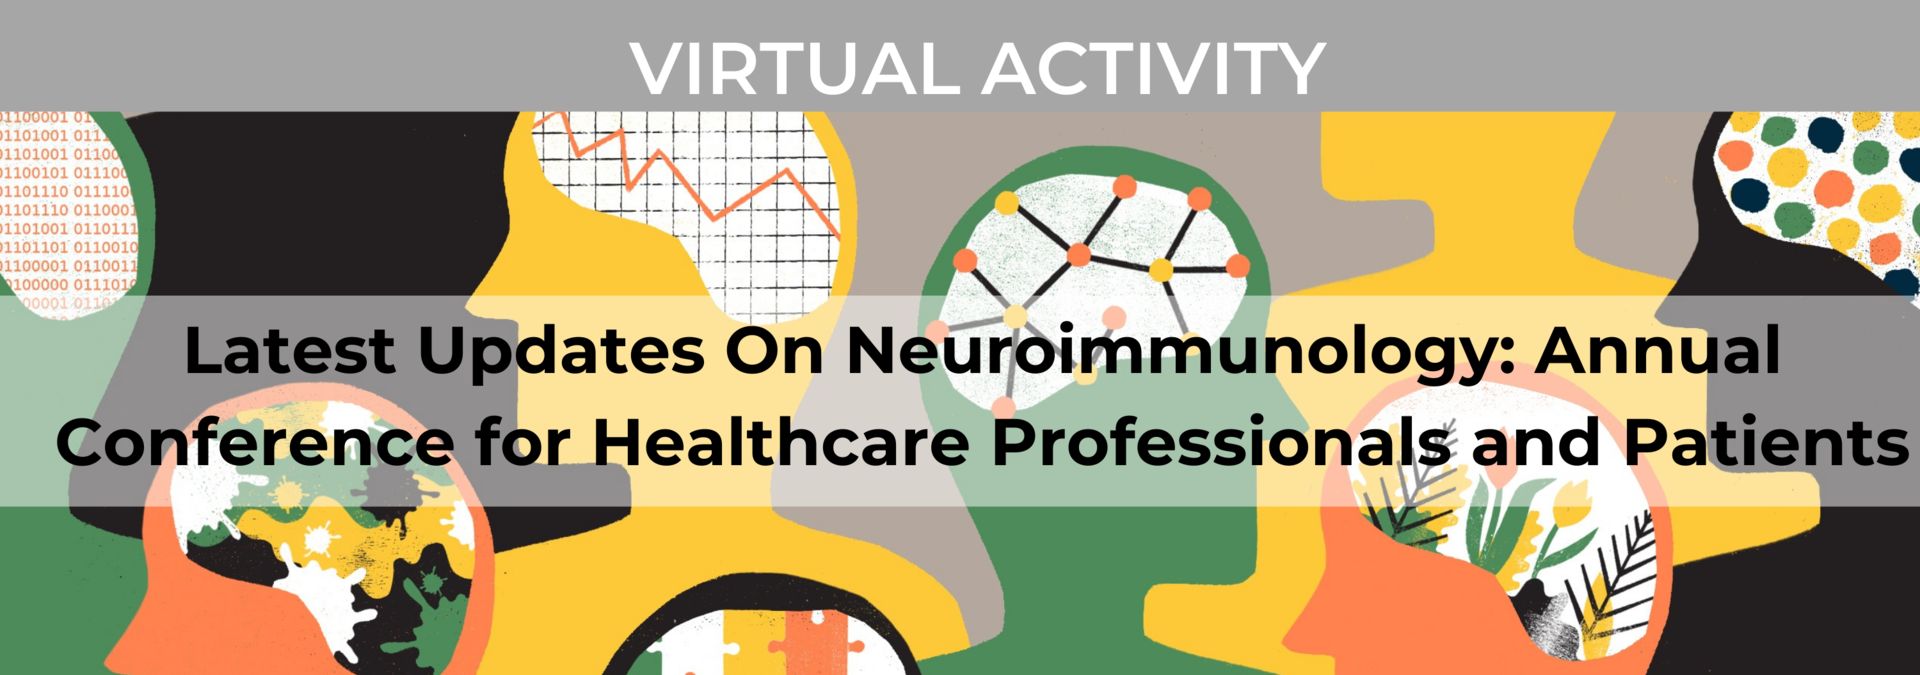 Latest Updates on Neuroimmunology: 6th Annual Conference for Healthcare Professionals and Patients, Online Event